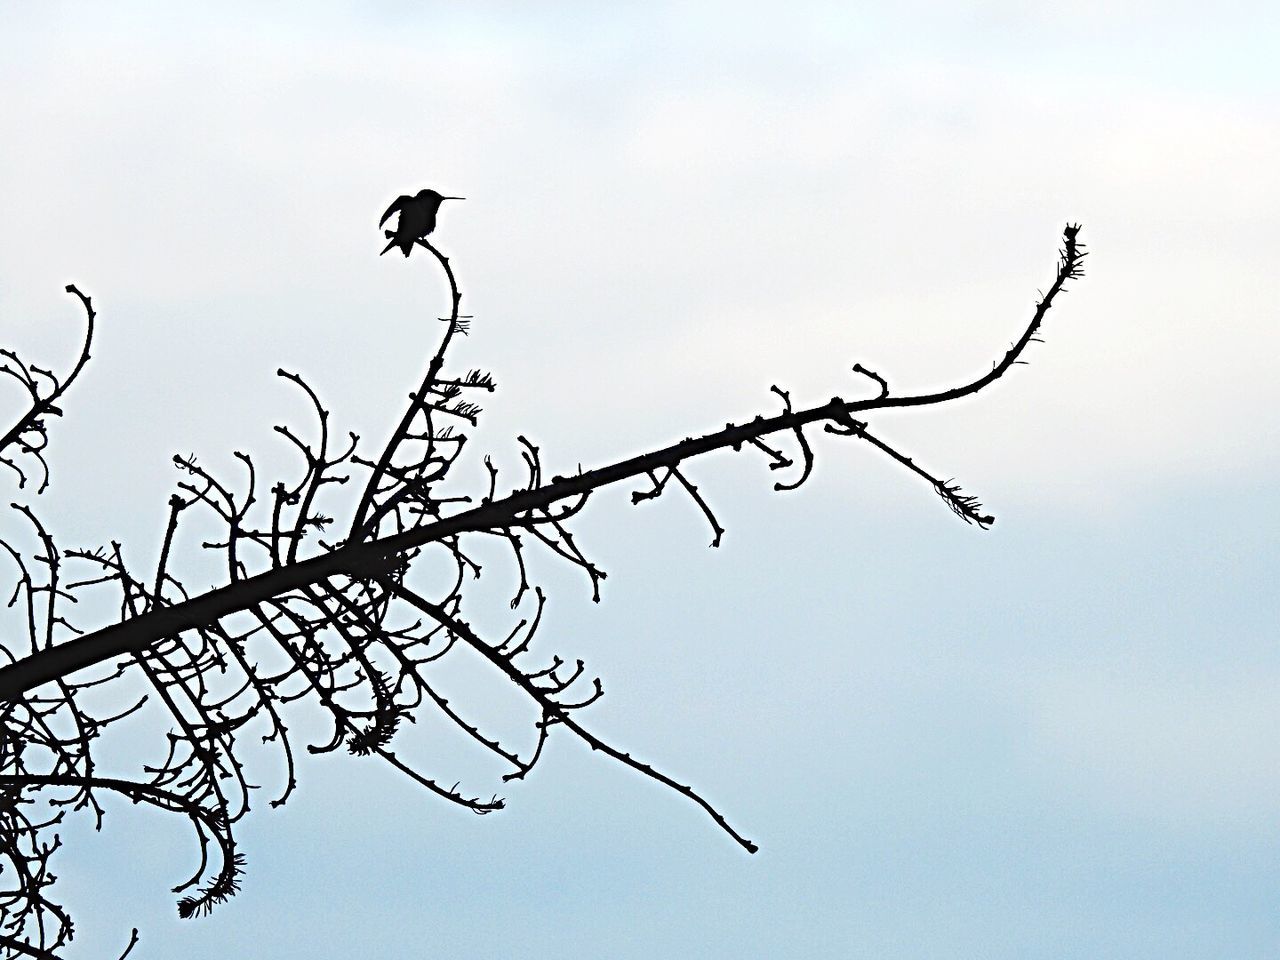 LOW ANGLE VIEW OF BIRDS PERCHING ON BRANCH